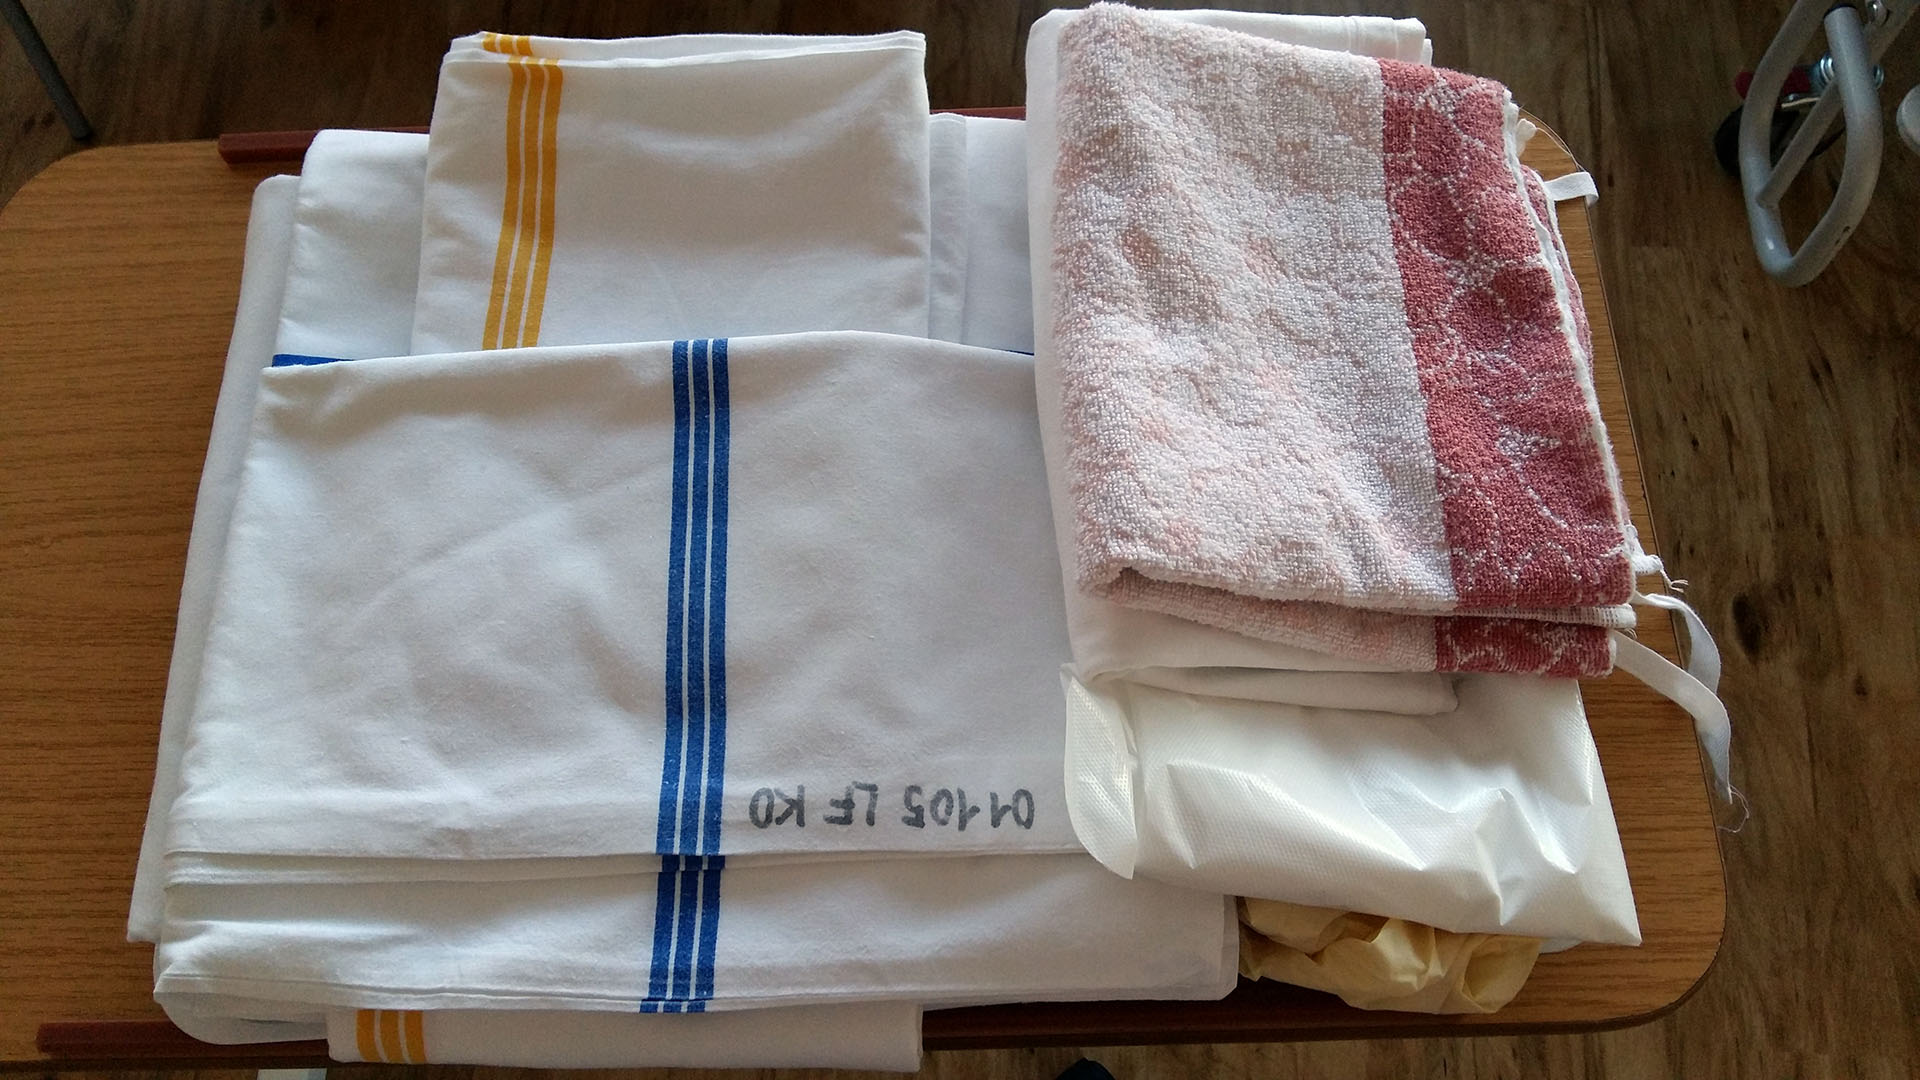 Arrangement of clean bed linen on the tray